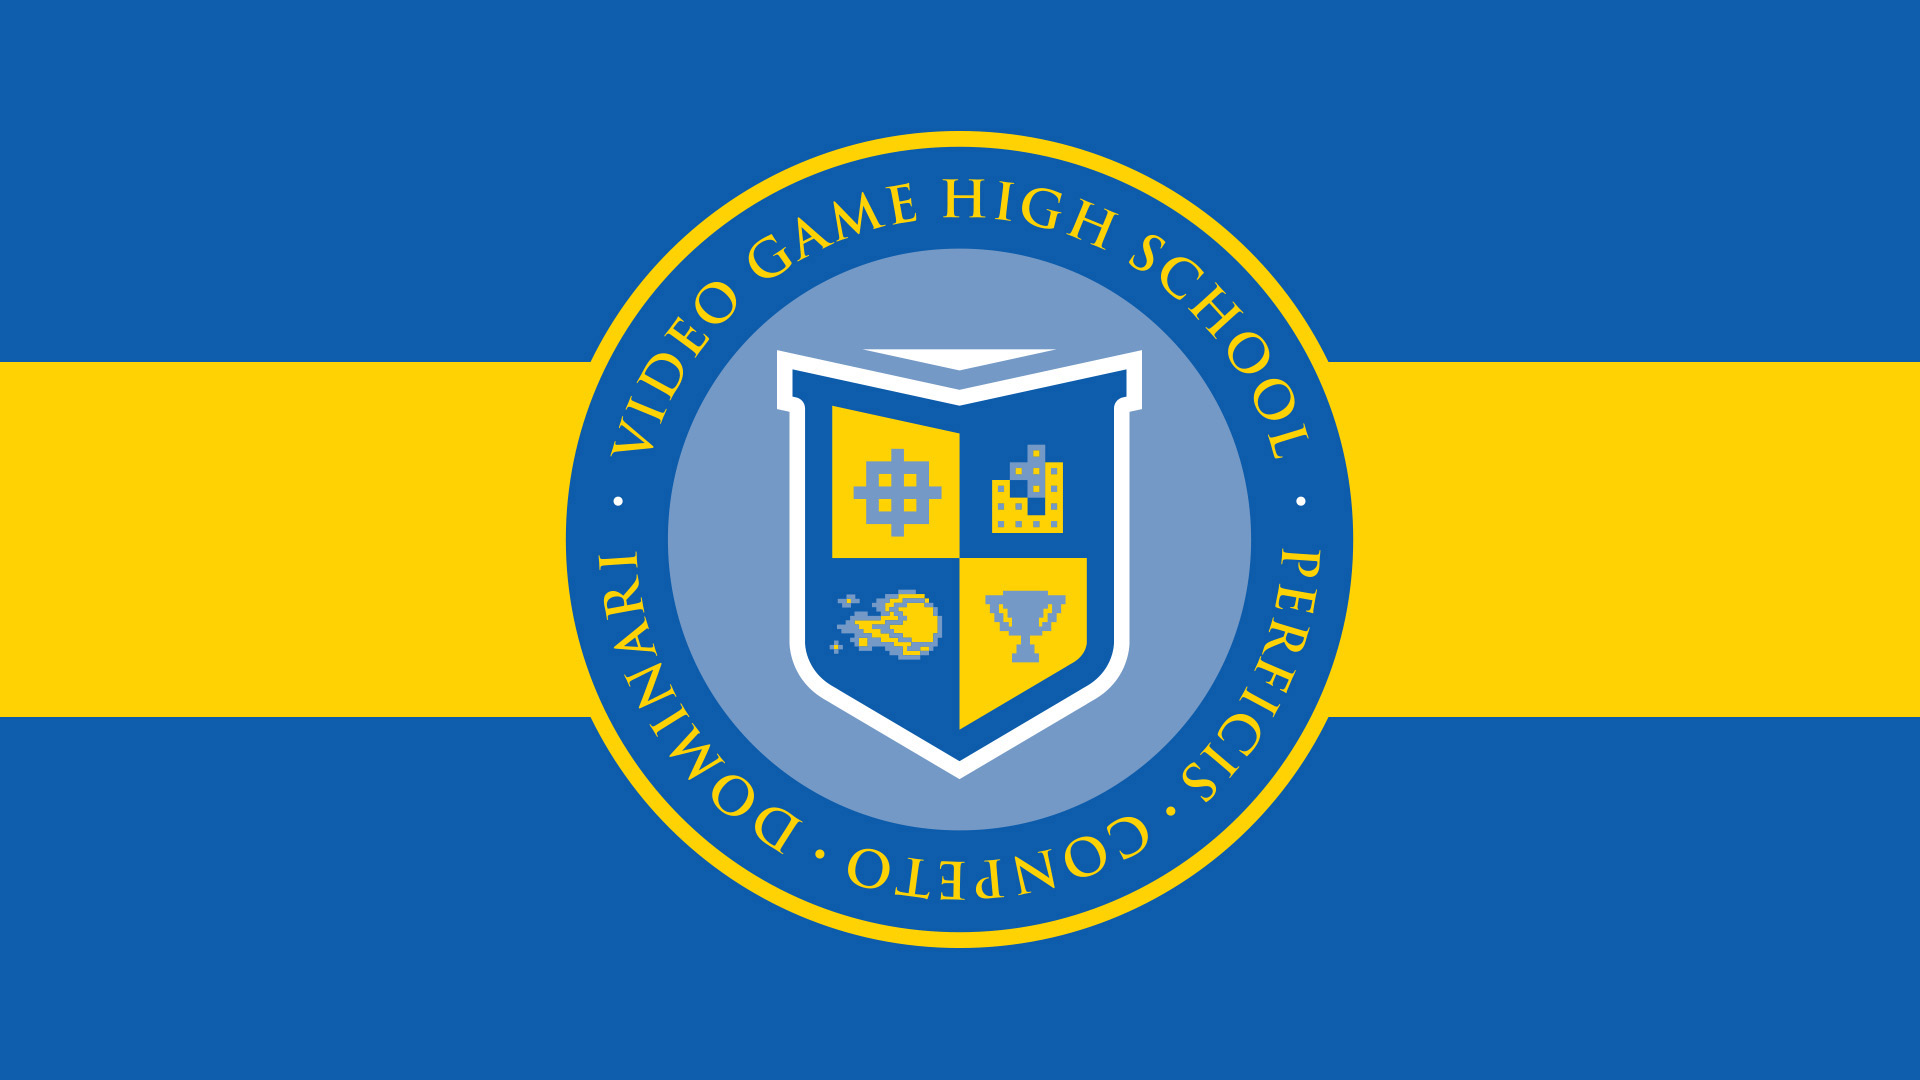 1920x1080 > Video Game High School Wallpapers